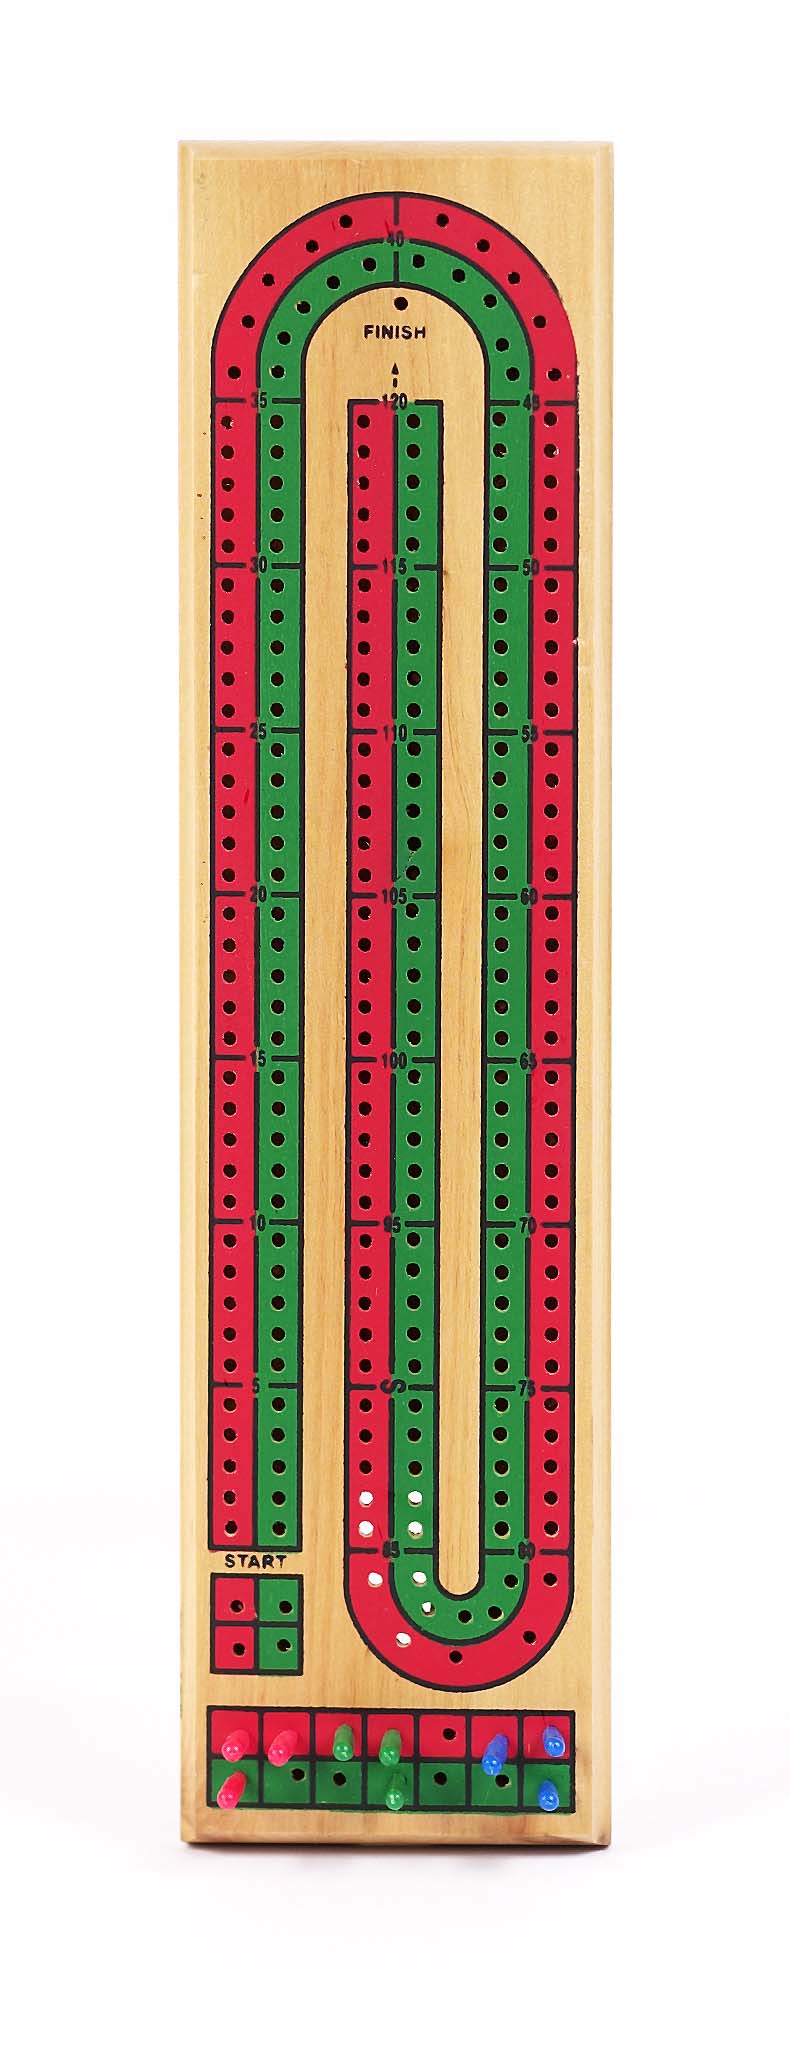 Double Track Wood Cribbage board